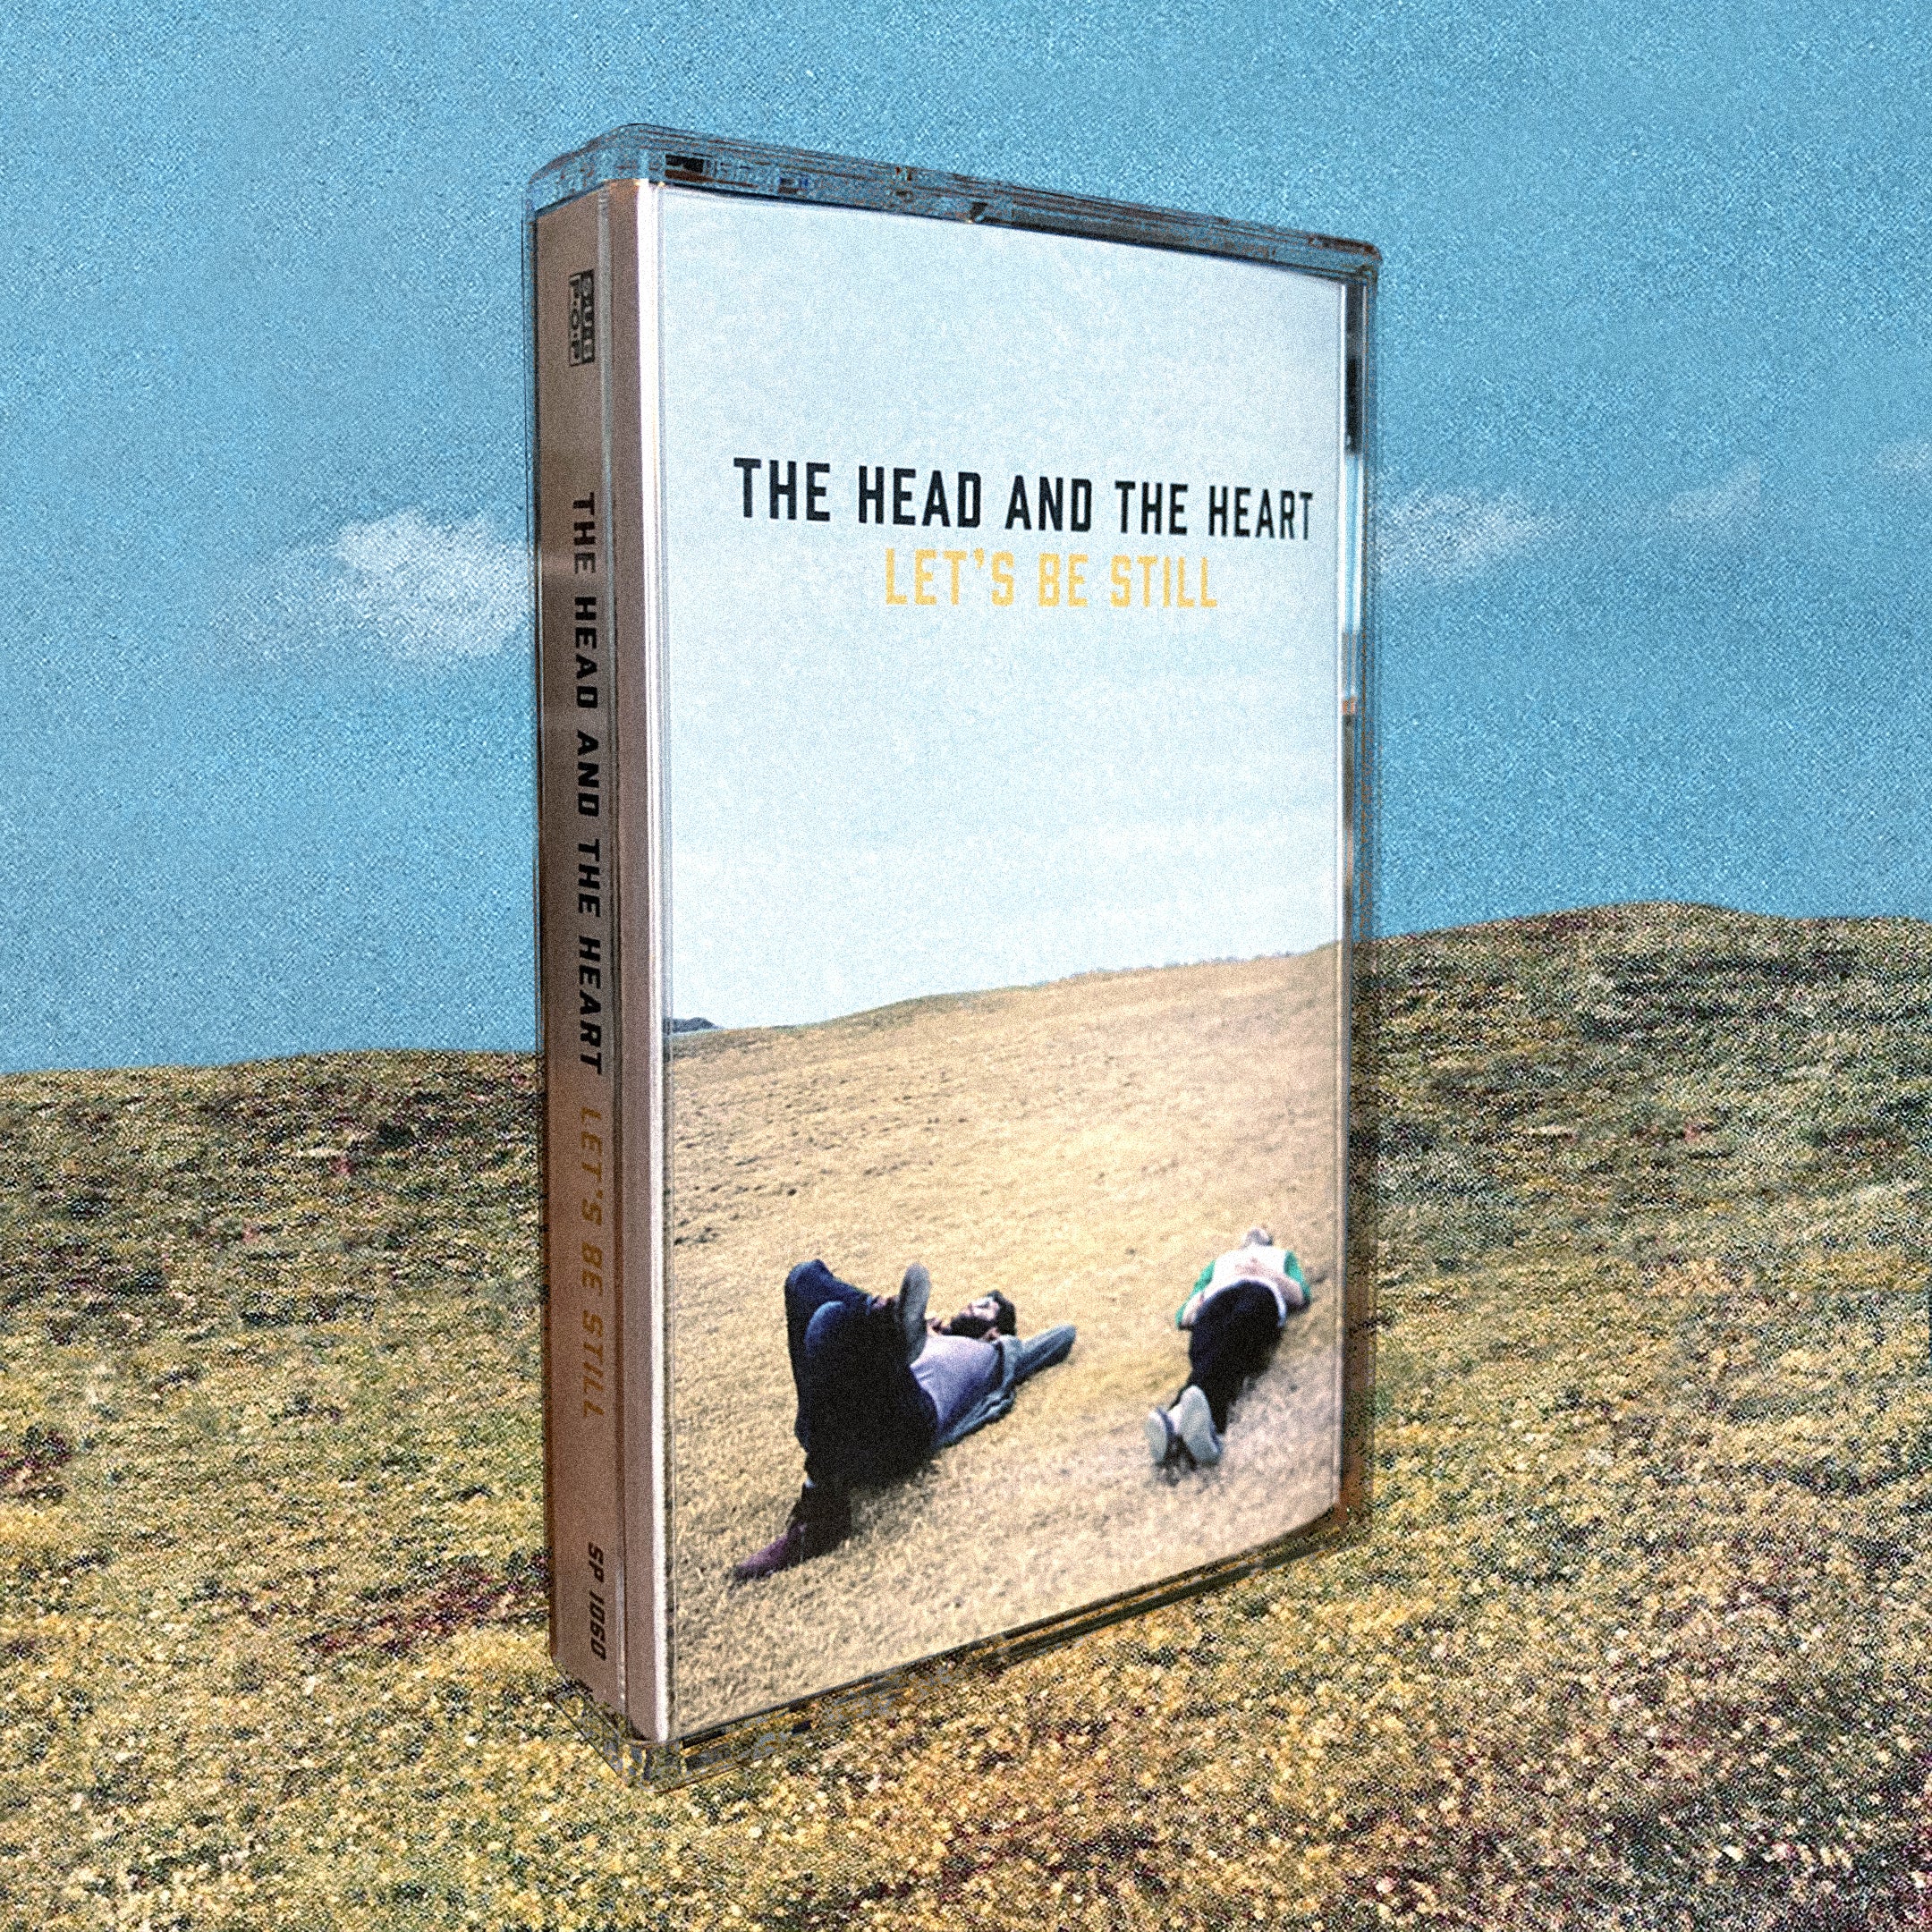 Unwind with "Let's Be Still," Our Second Exclusive Cassette Release